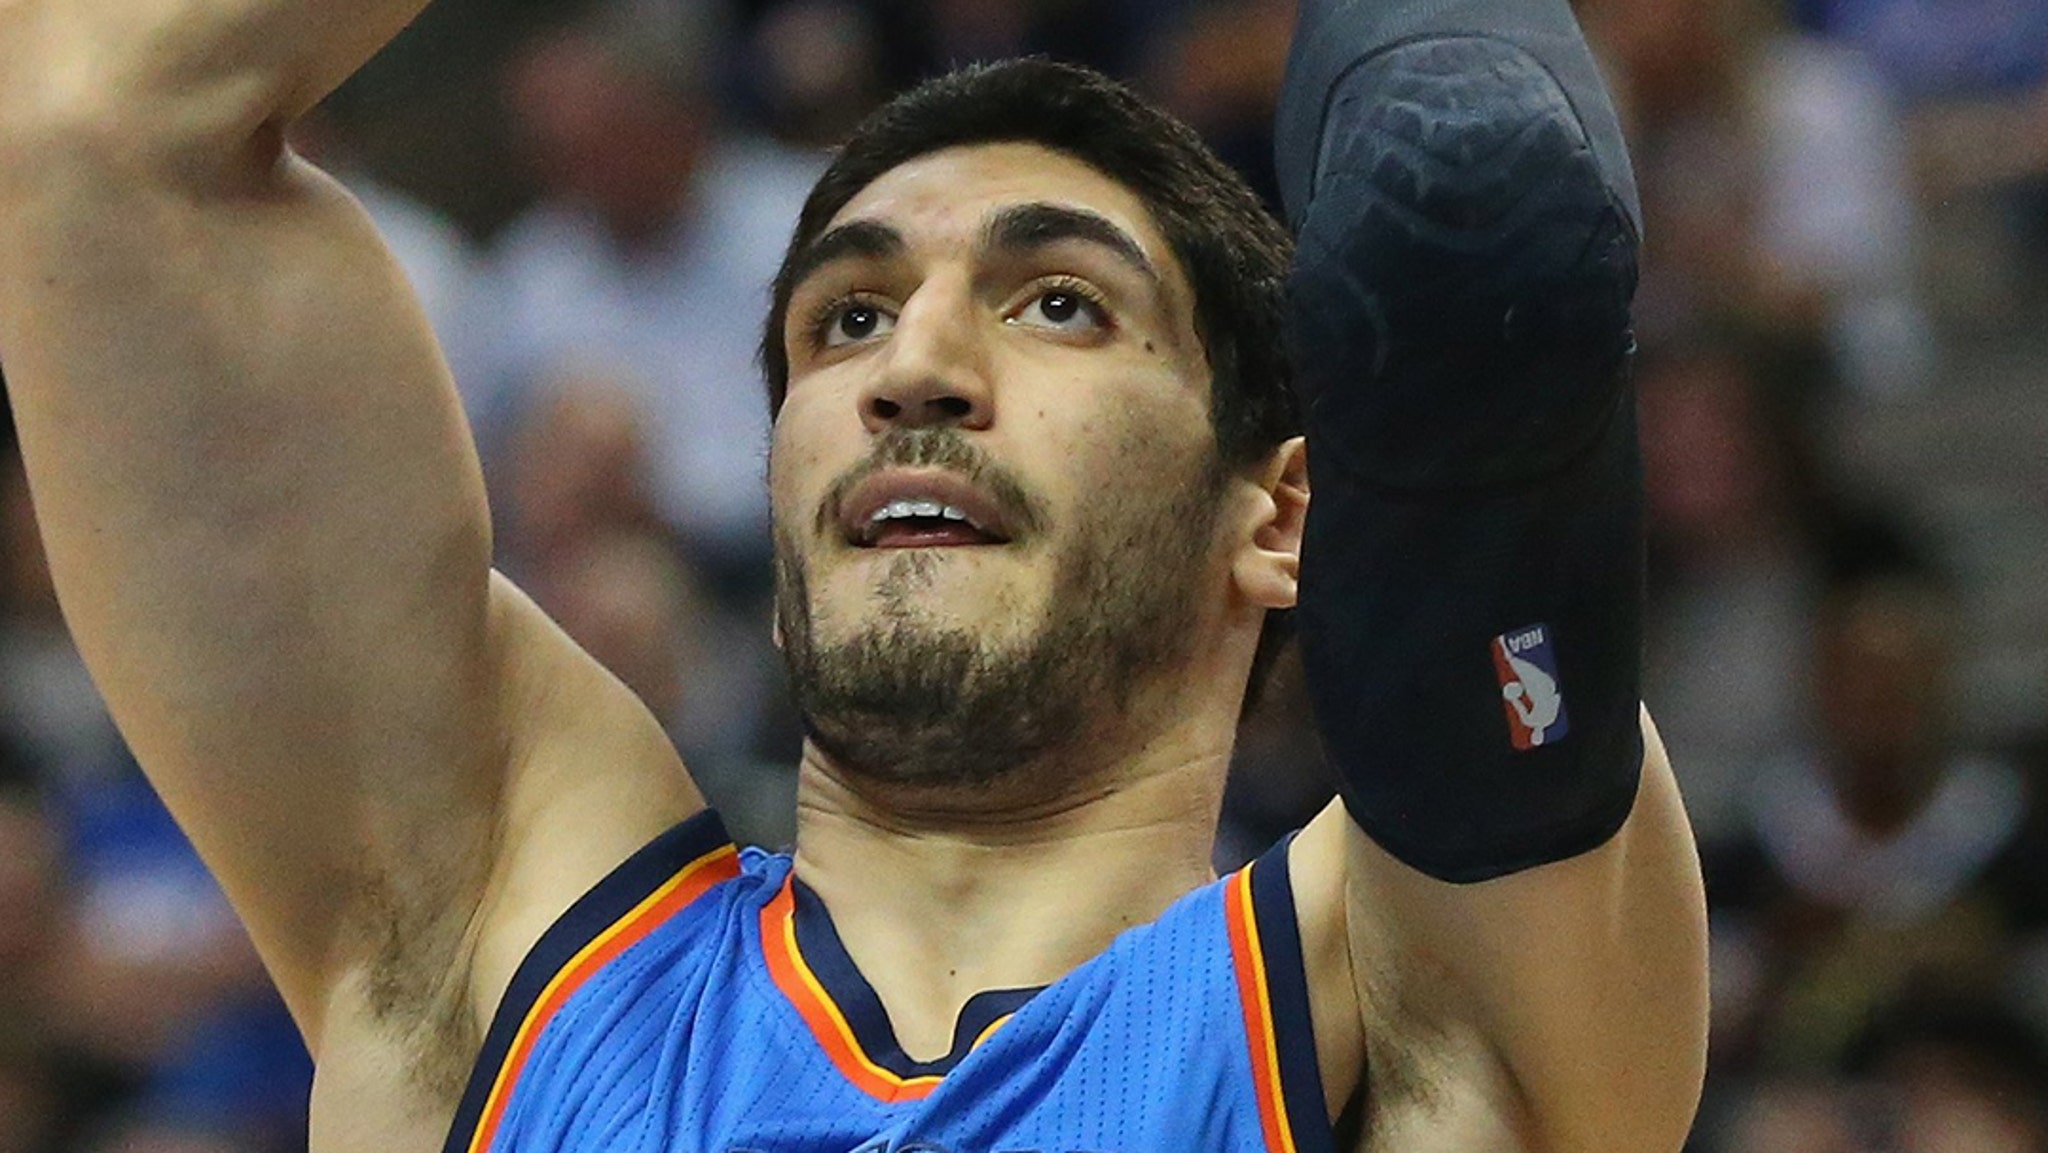 Enes Kanter: I Fear For My Life, Erdoğan Will Attack Greece One Day